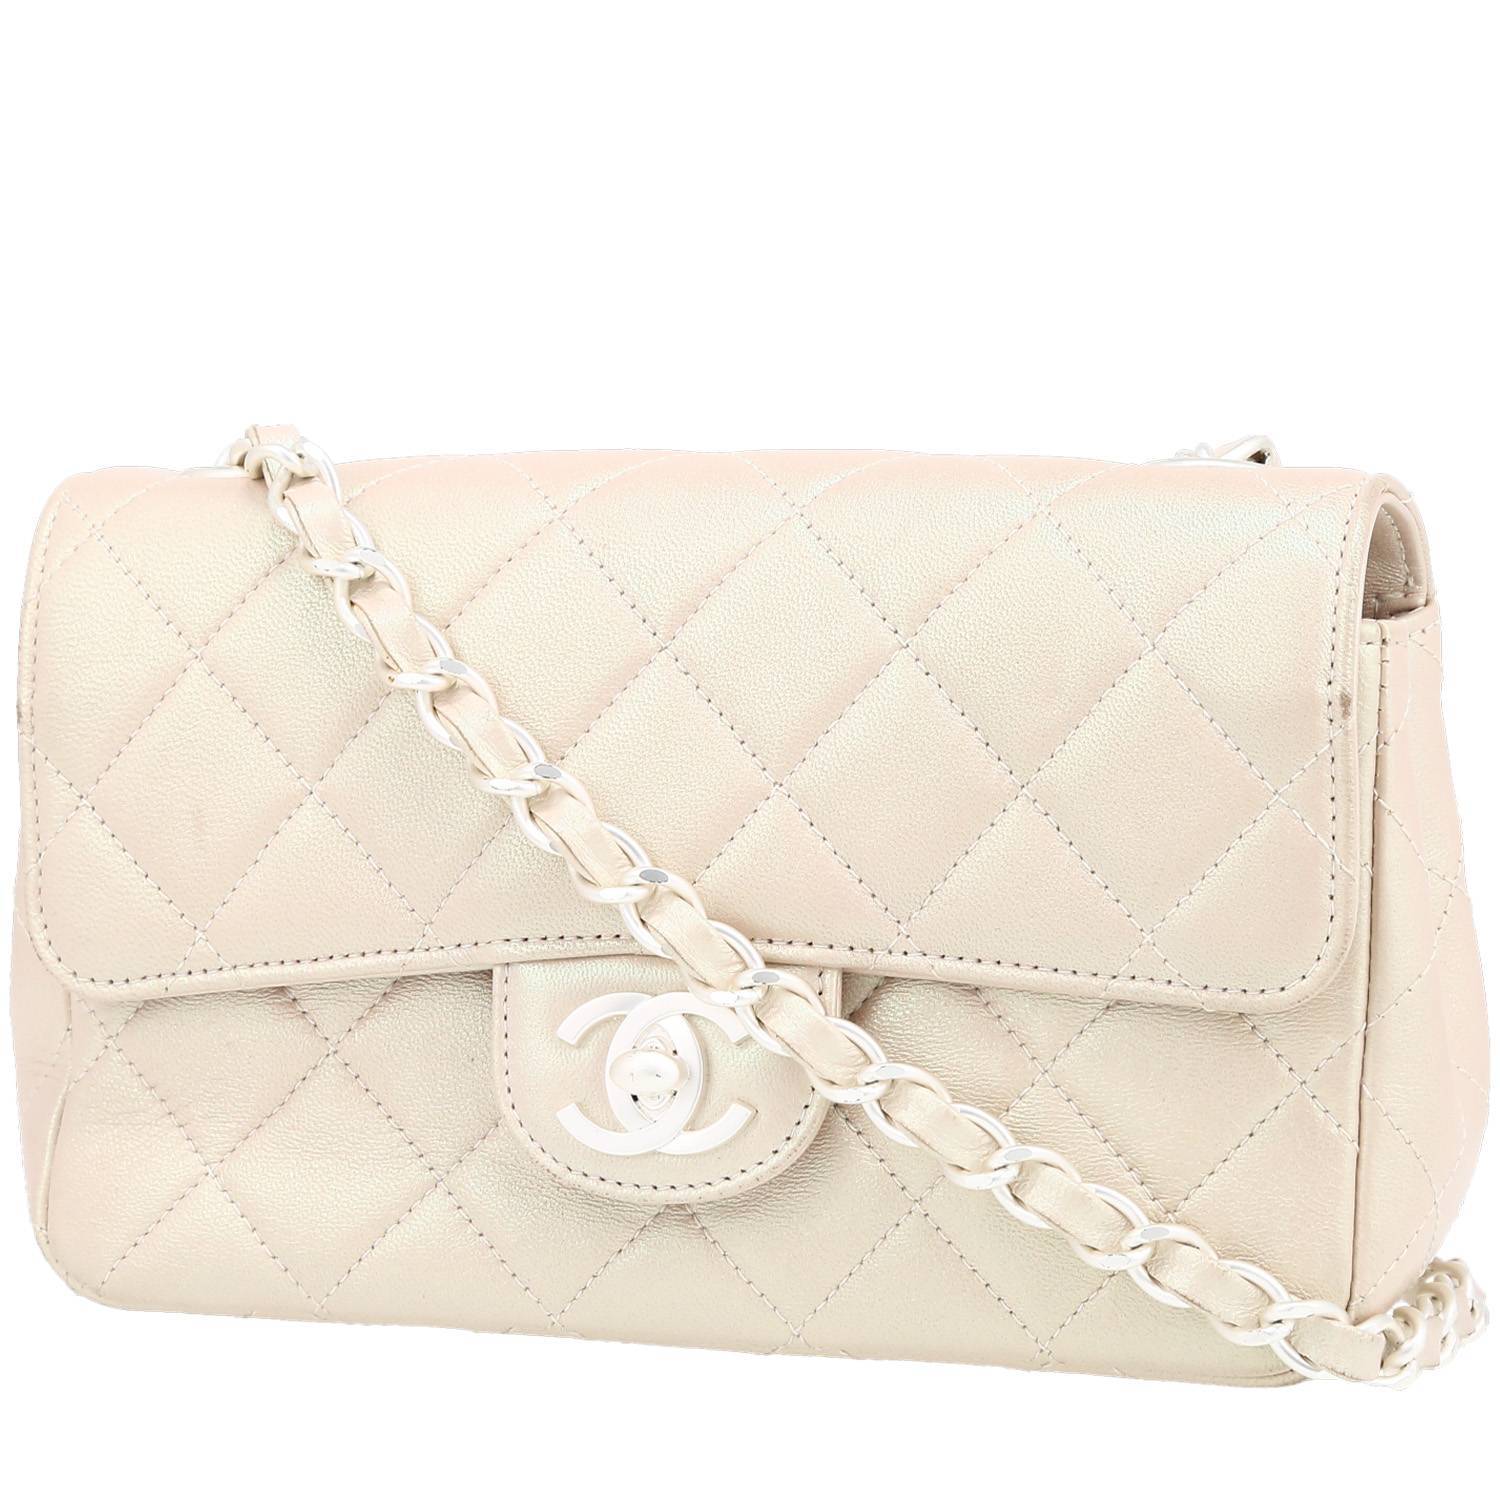 Chanel Mini Timeless Shoulder Bag in Silver Quilted Leather